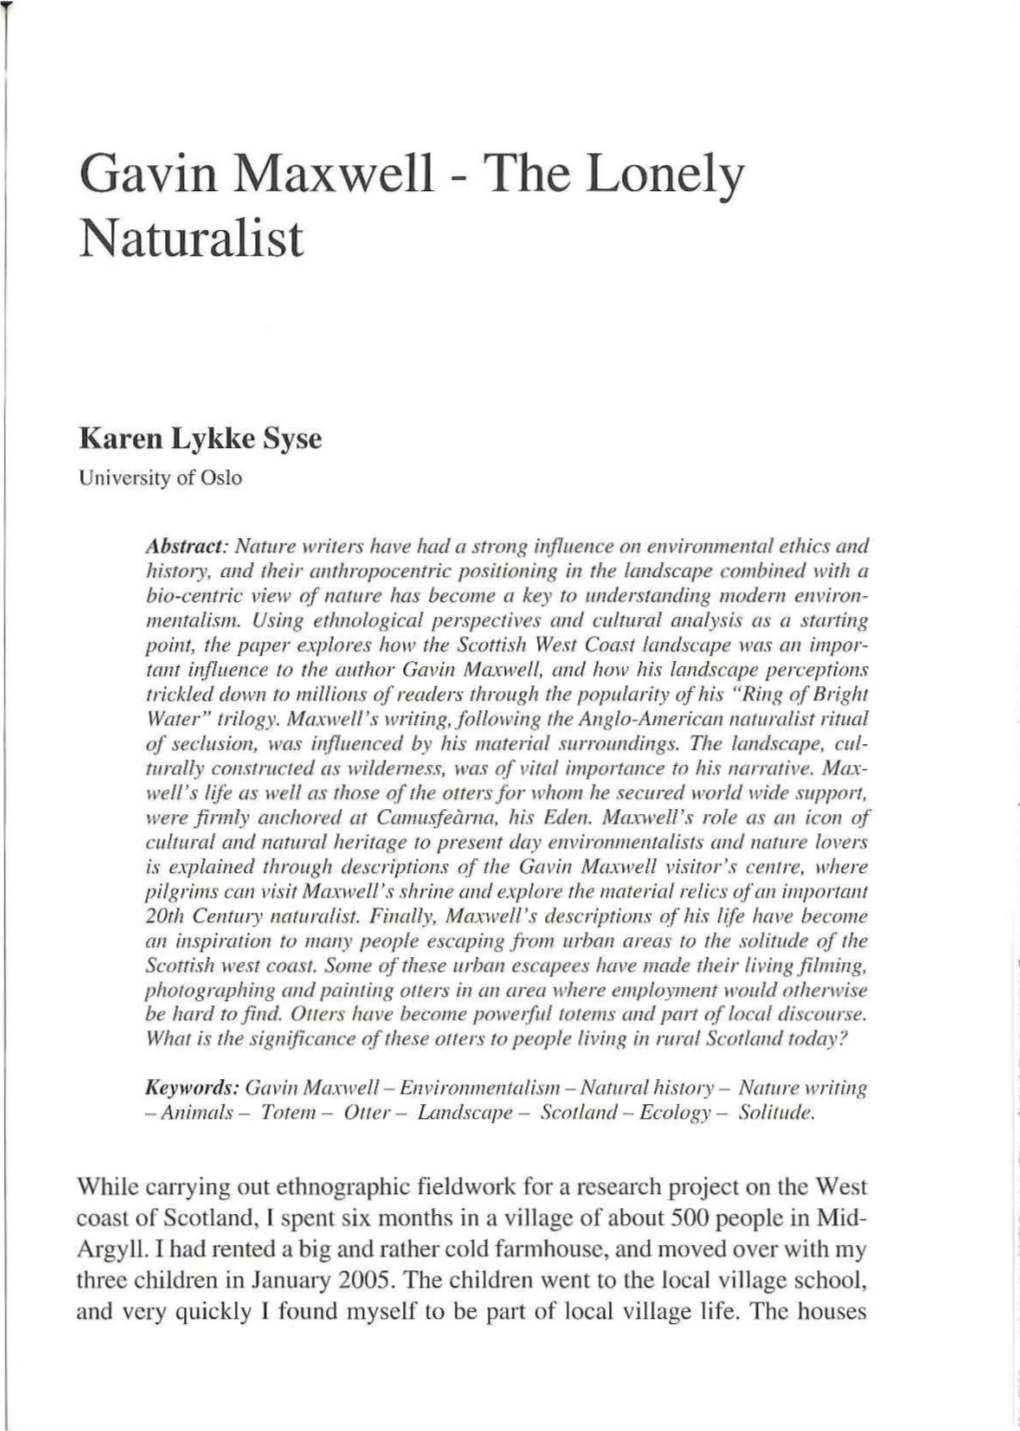 Gavin Maxwell - the Lonely Naturalist